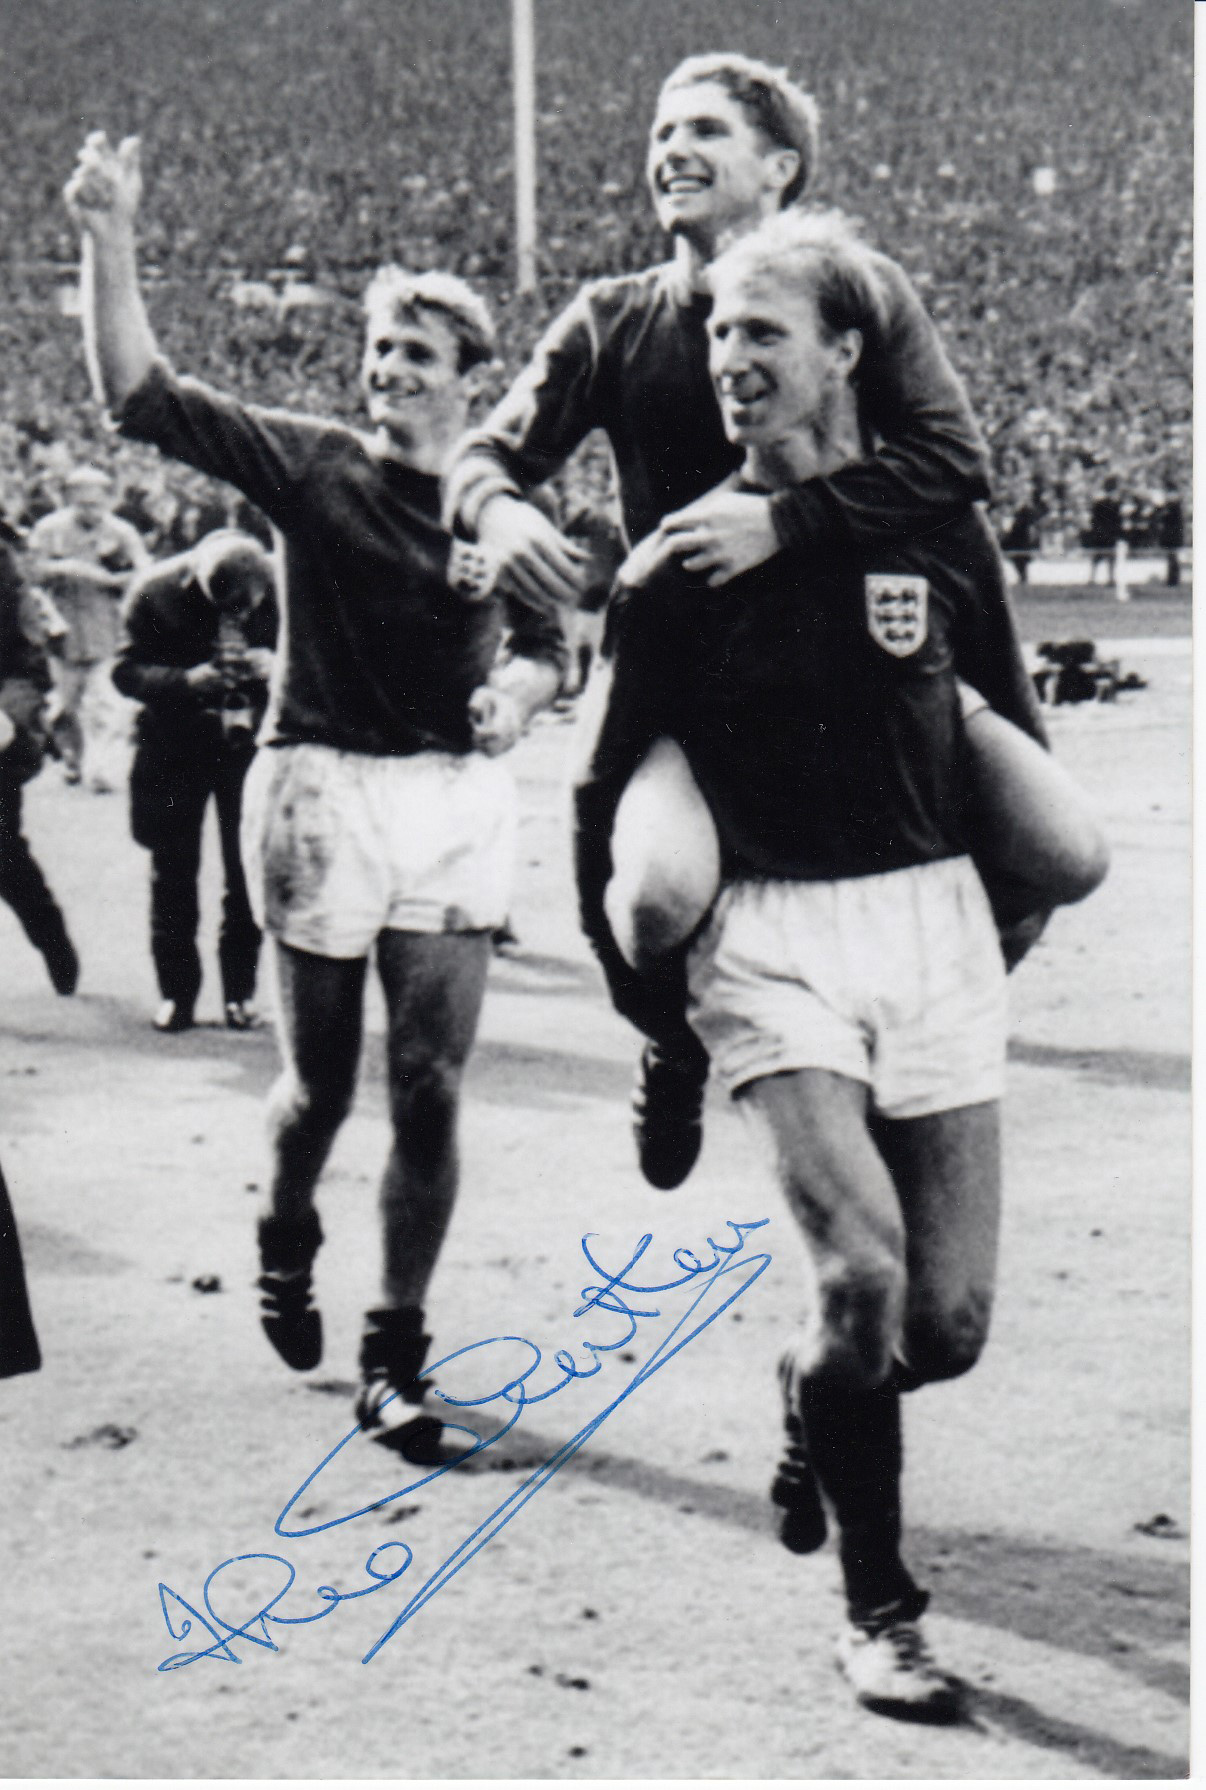 JACK CHARLTON 1966: Autographed 6 x 4 photo, depicting England's Alan Ball on the back of teammate